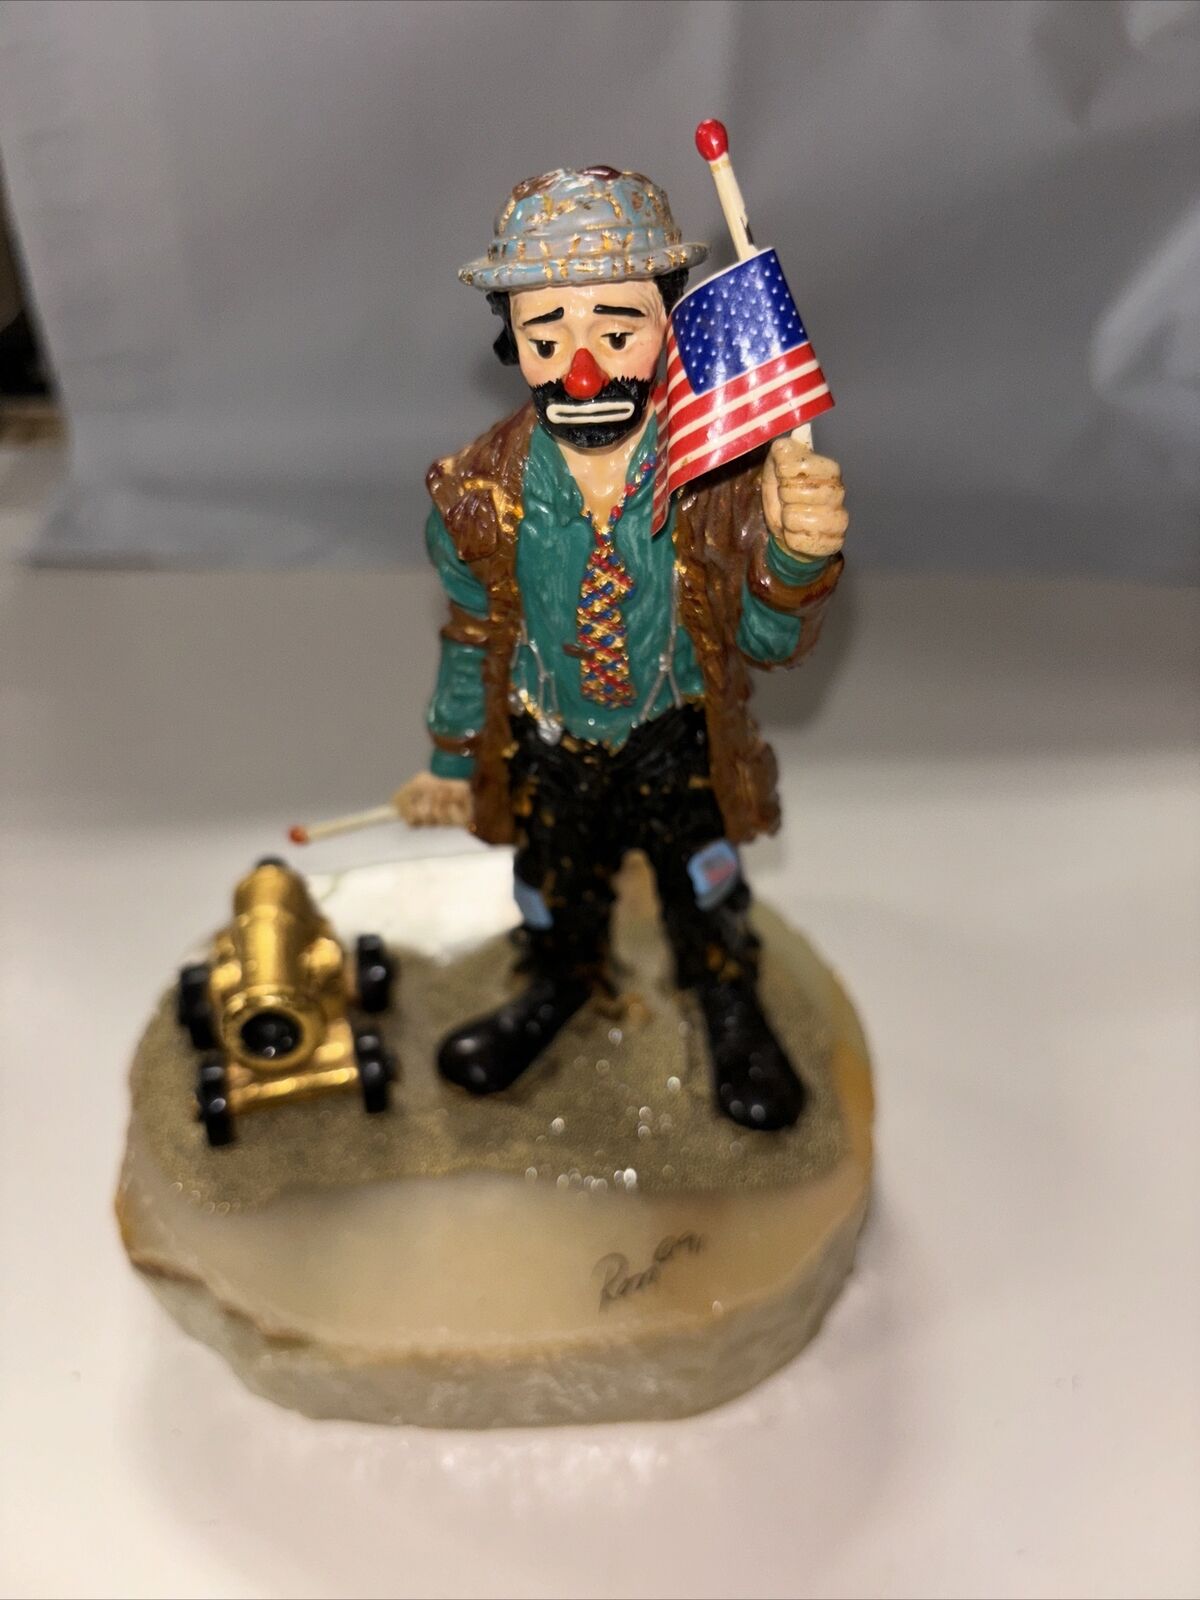 Ron Lee Clown Emmett Kelly “God Bless America” Signed, Numbered 24k gold 7”x 5”